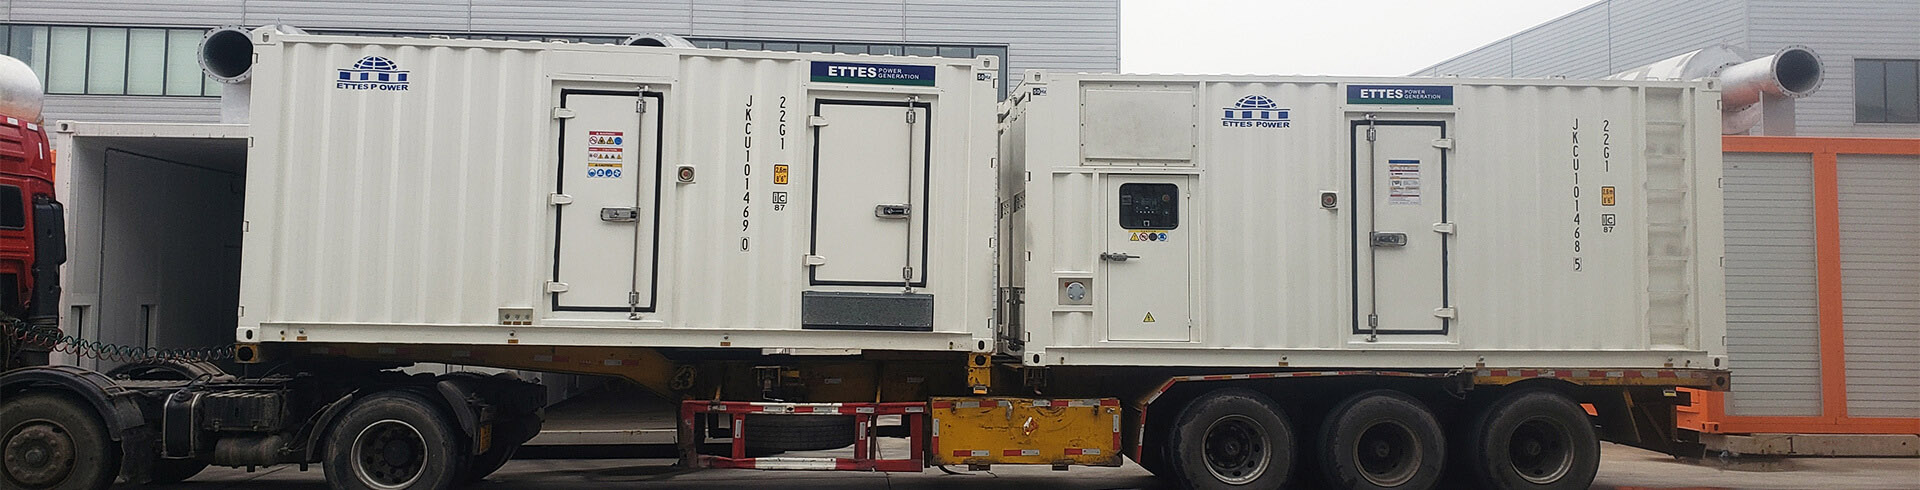 Cummins 300kW 500kW container natural gas generation & CHP for transportation ETTES POWER